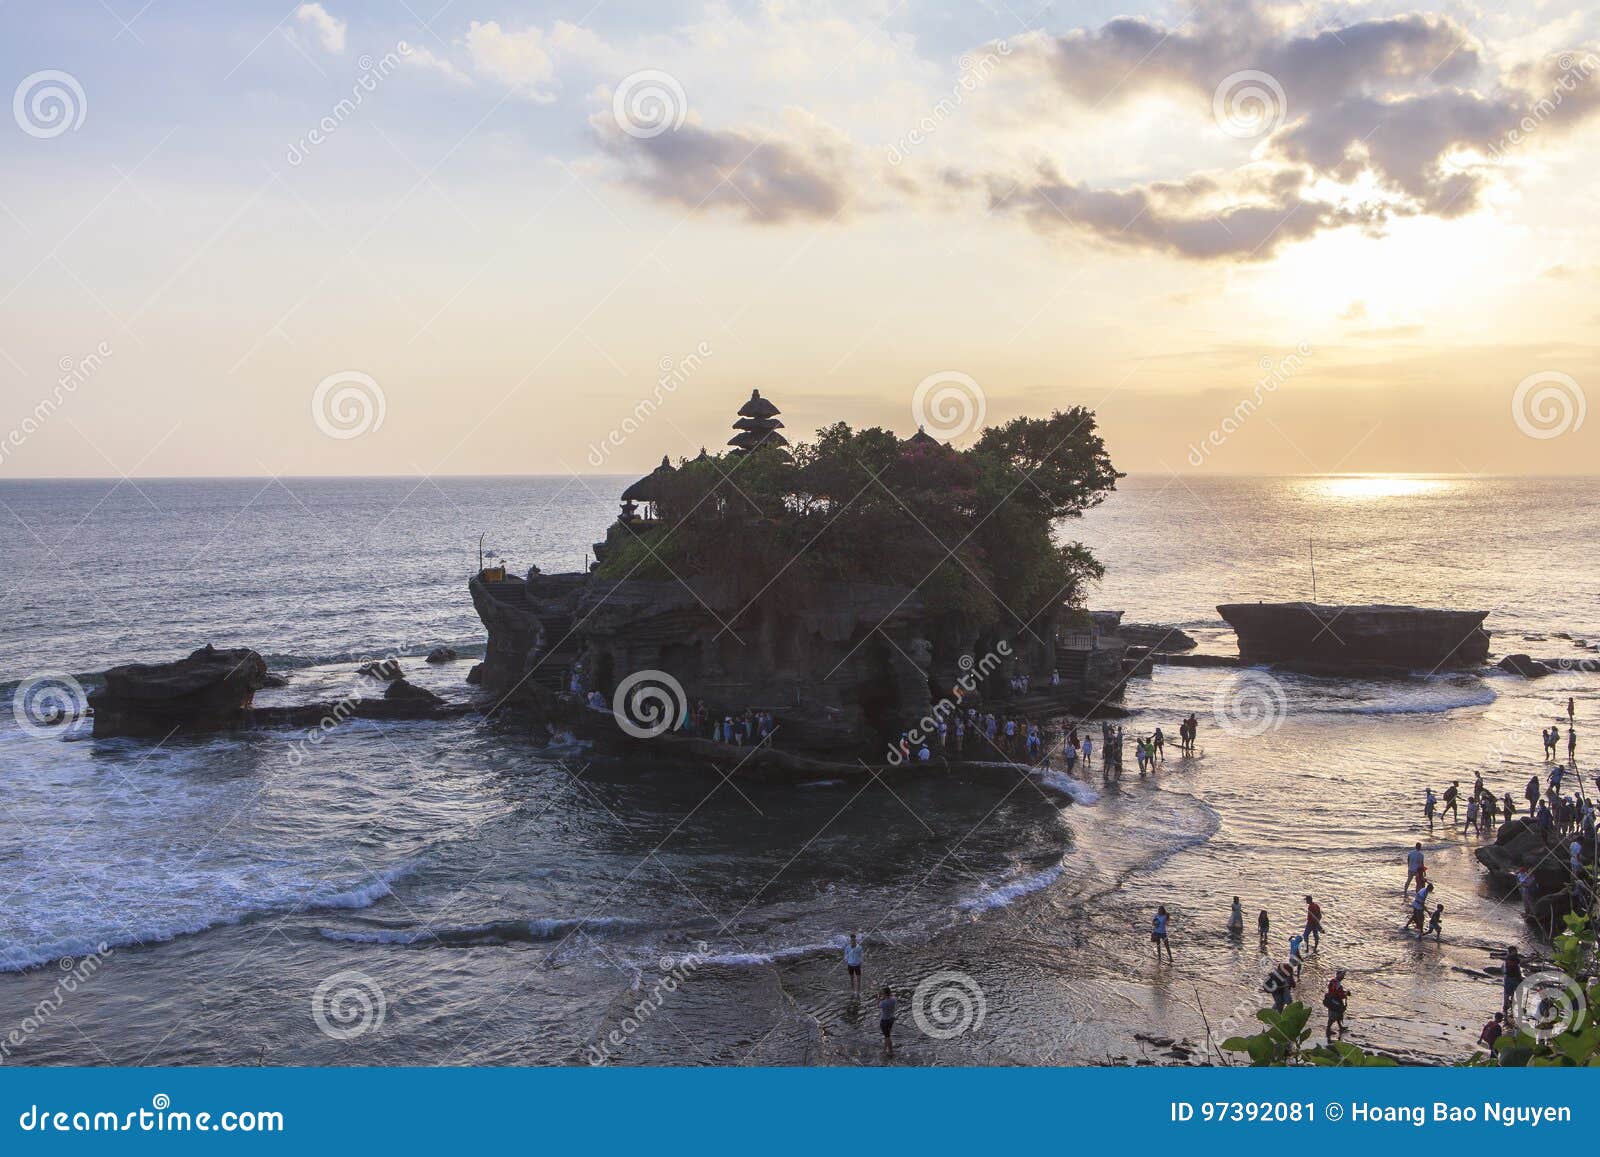 sunset at tanah lot temple in bali